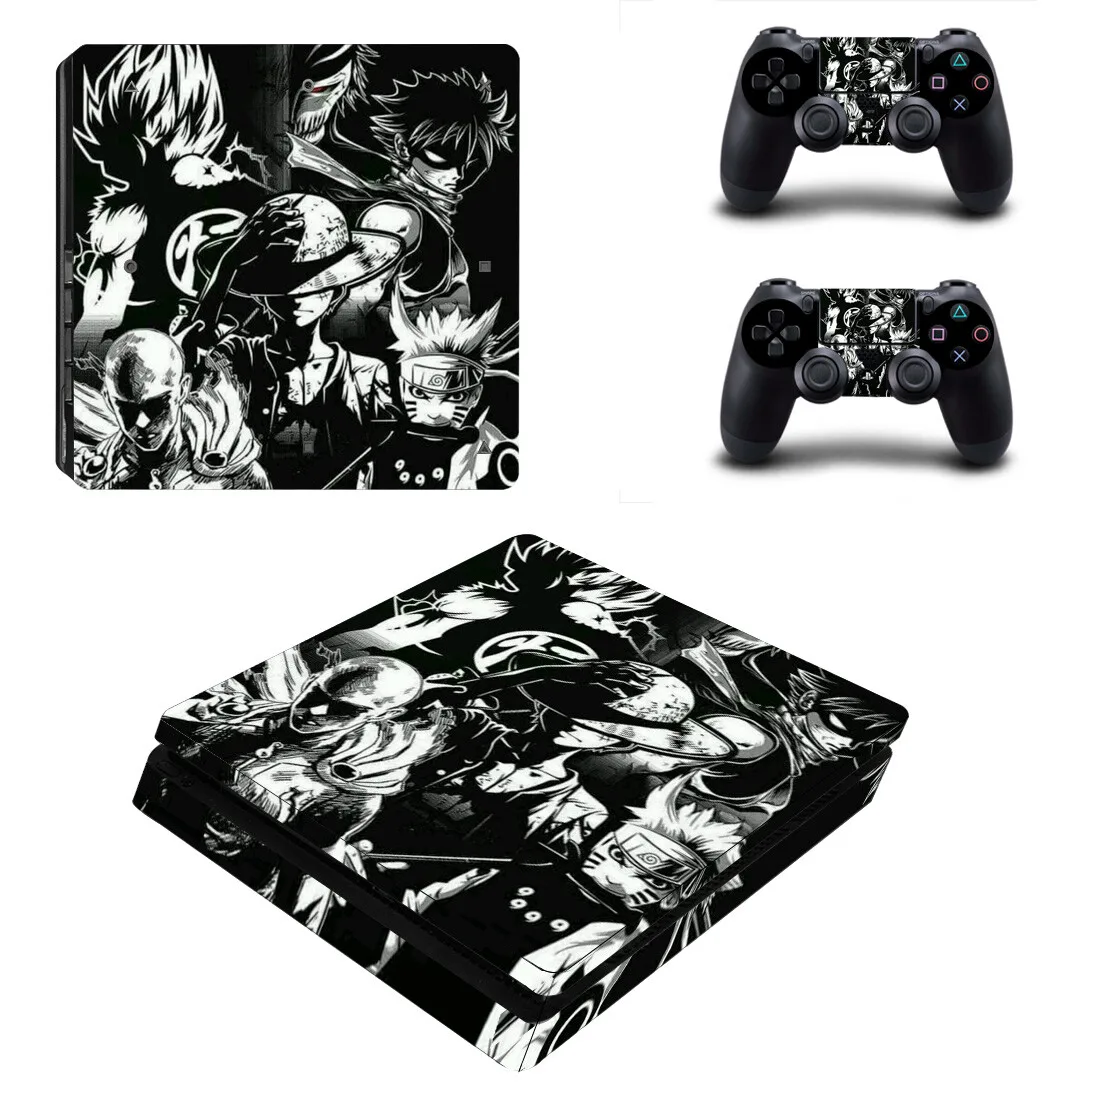 

One Punch Man Bleach Goku Fairy Tail PS4 Slim Skin Sticker Decal Cover Protector For Console and Controller Skins Vinyl